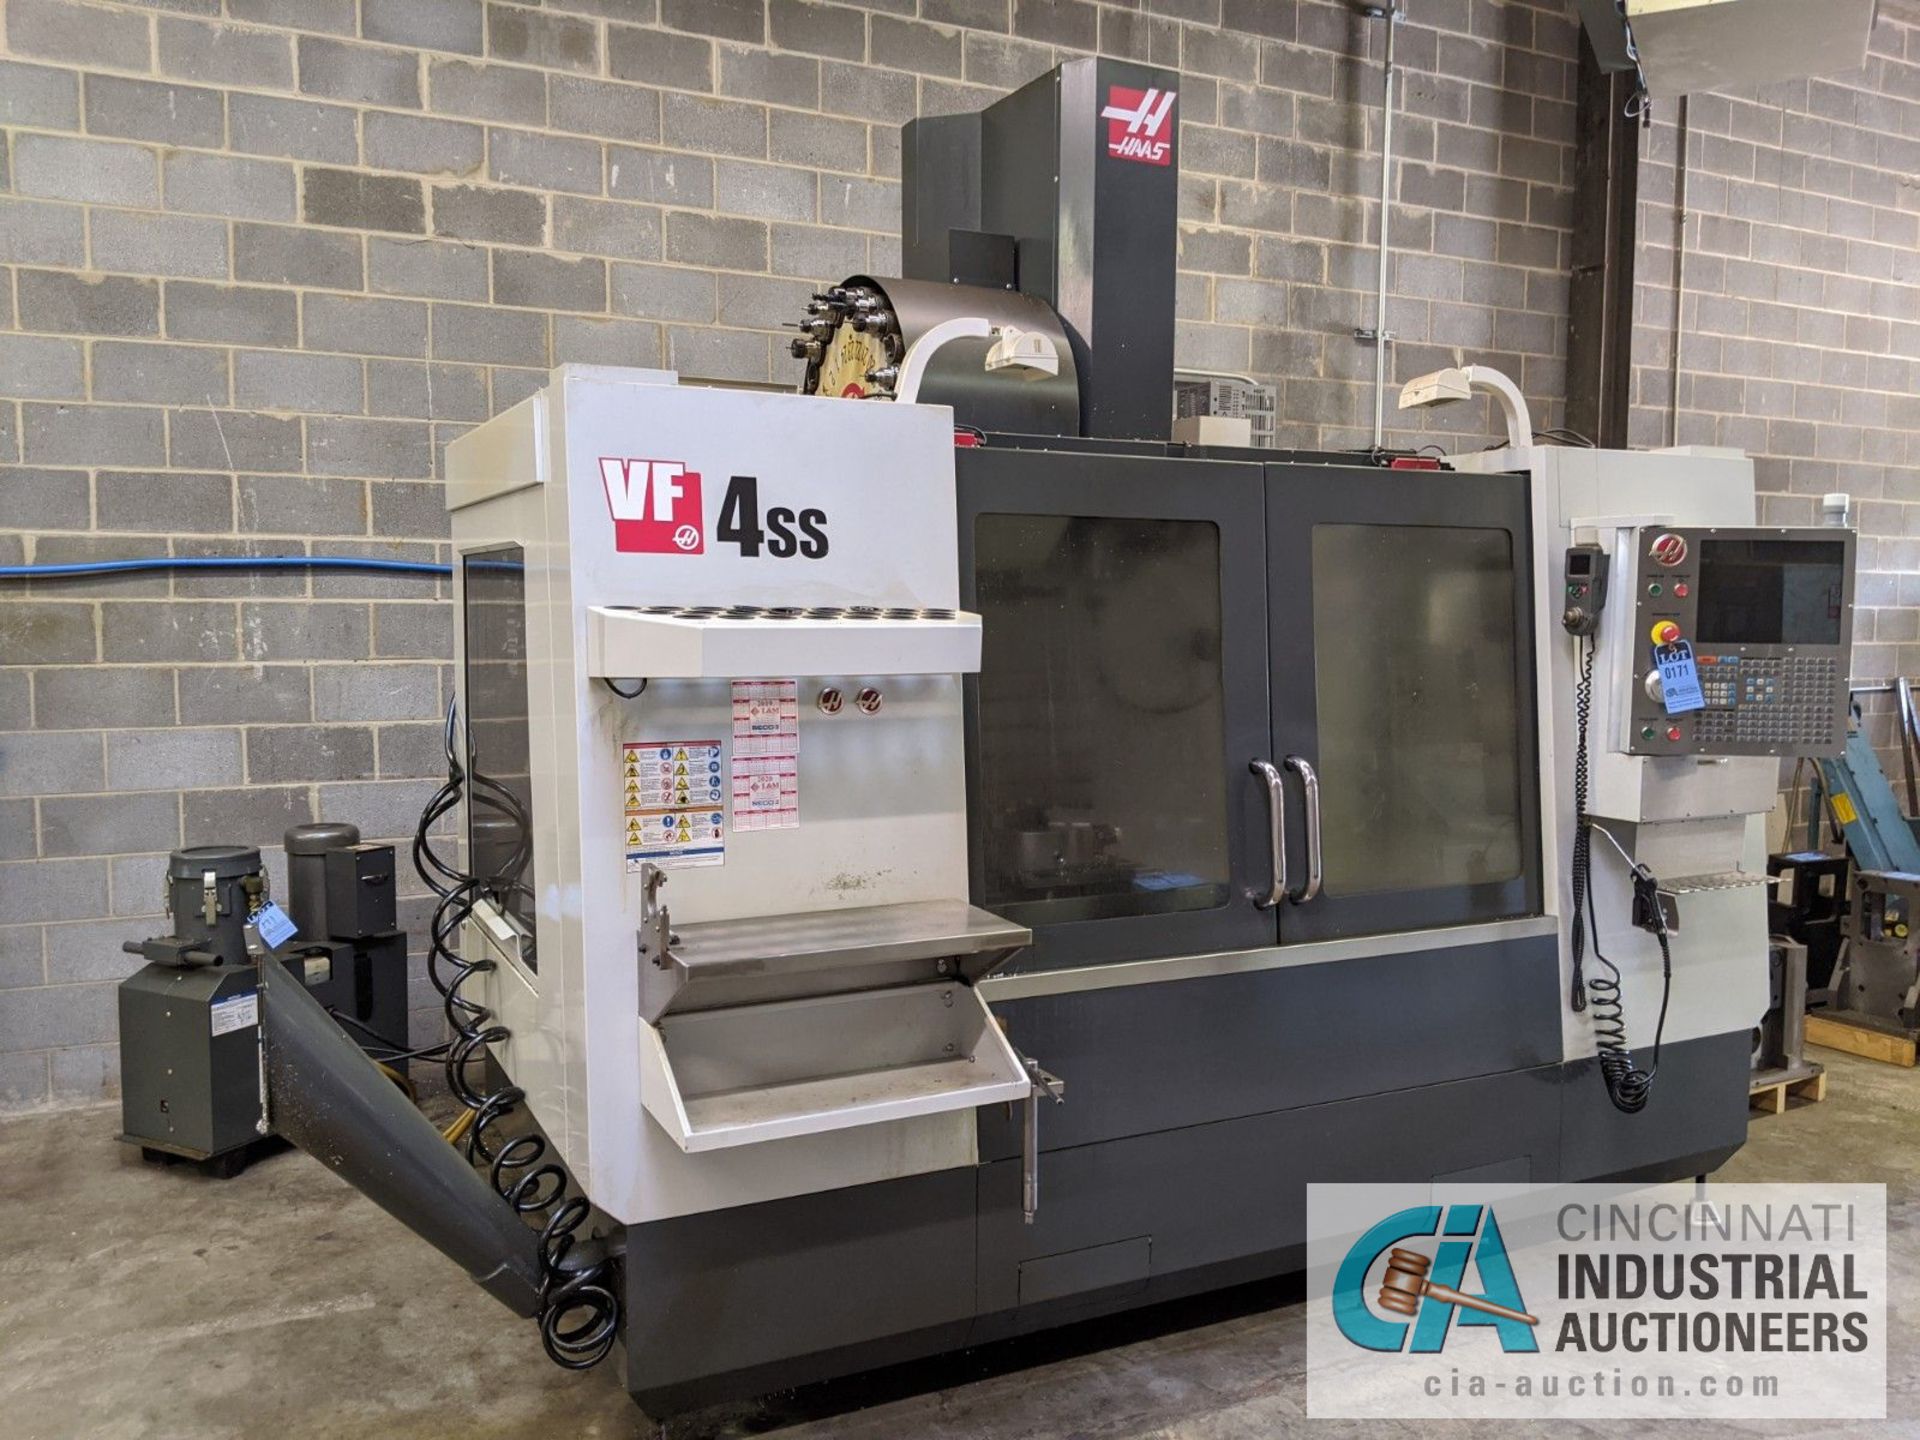 HAAS MODEL VF4SS CNC VERTICAL MACHINING CENTER; S/N 1106174, 20" X 52" TABLE, X-TRAVEL 50", Y-TRAVEL